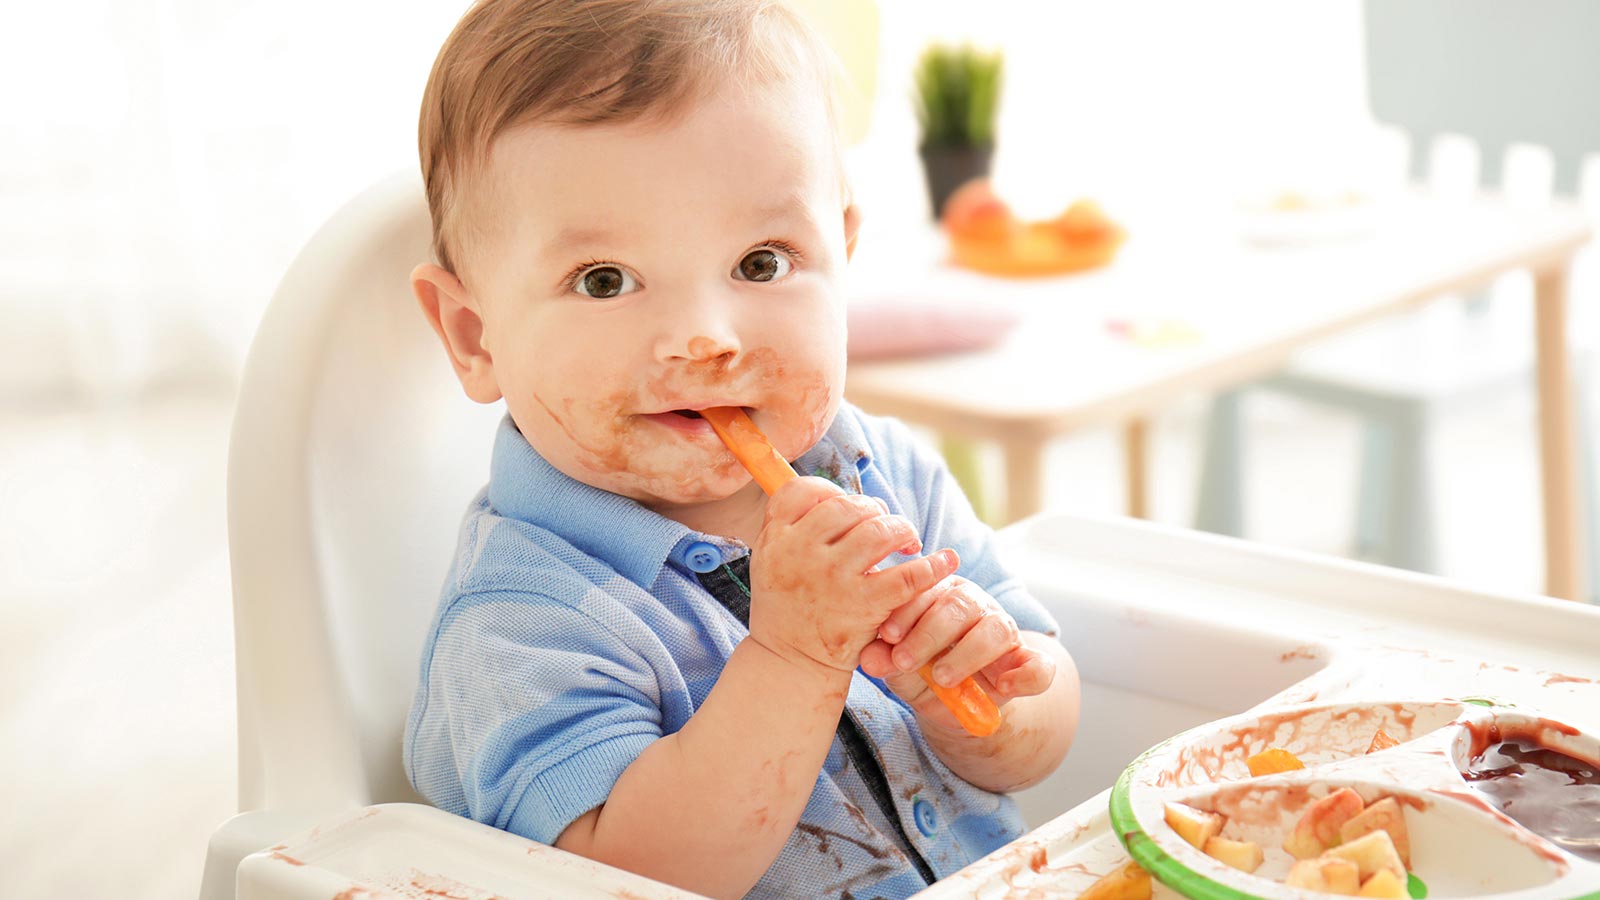 9 Myths and Truths About Starting Solids – Sharon Mazel